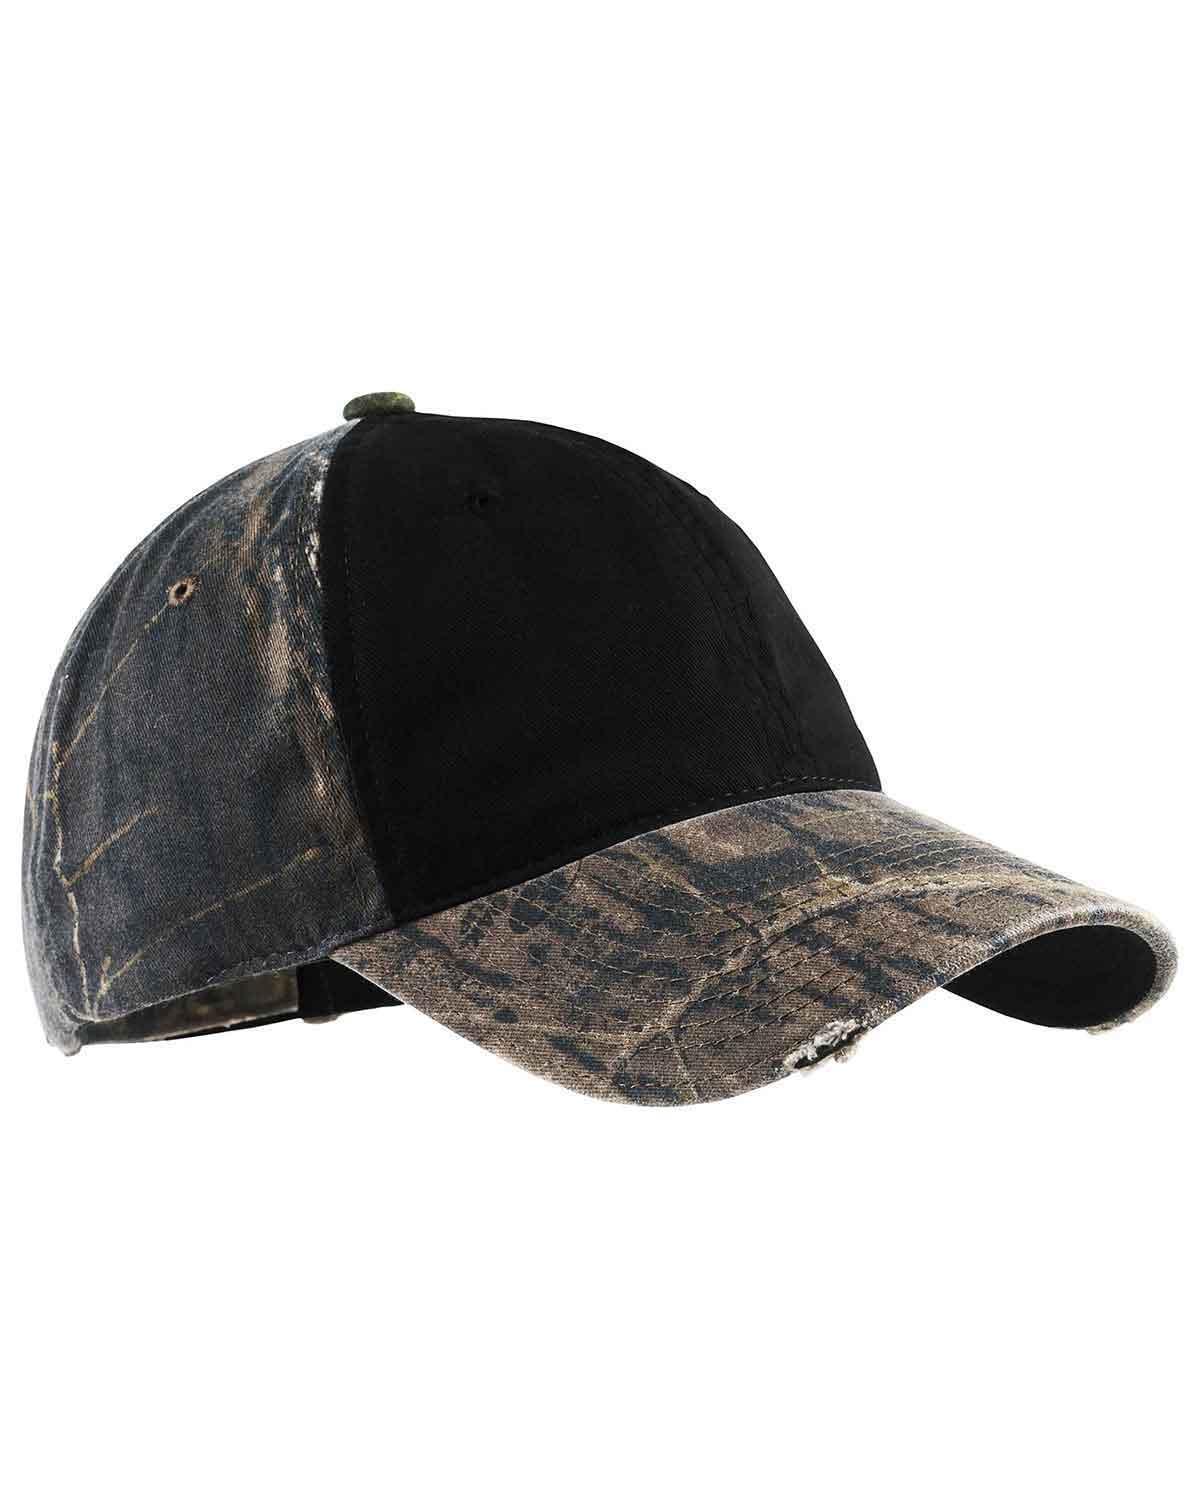 Port Authority C807 Unisex Camo Cap With Contrast Front-Panel at Apparelstation